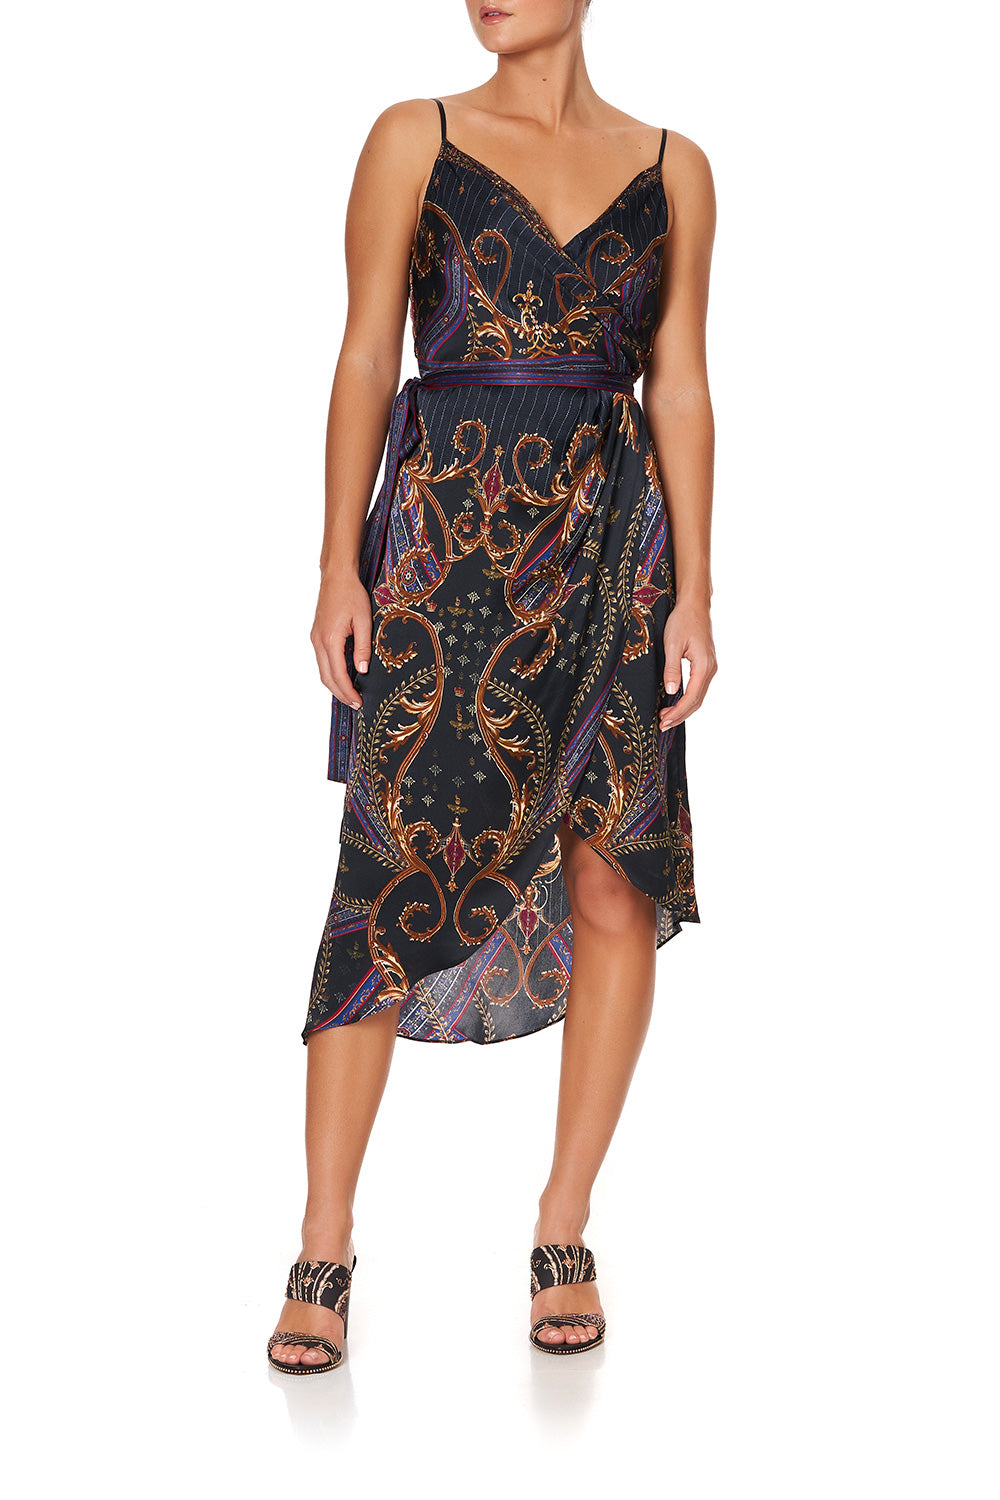 ASYMMETRICAL WRAP DRESS WITH STRAPS DINING HALL DARLING